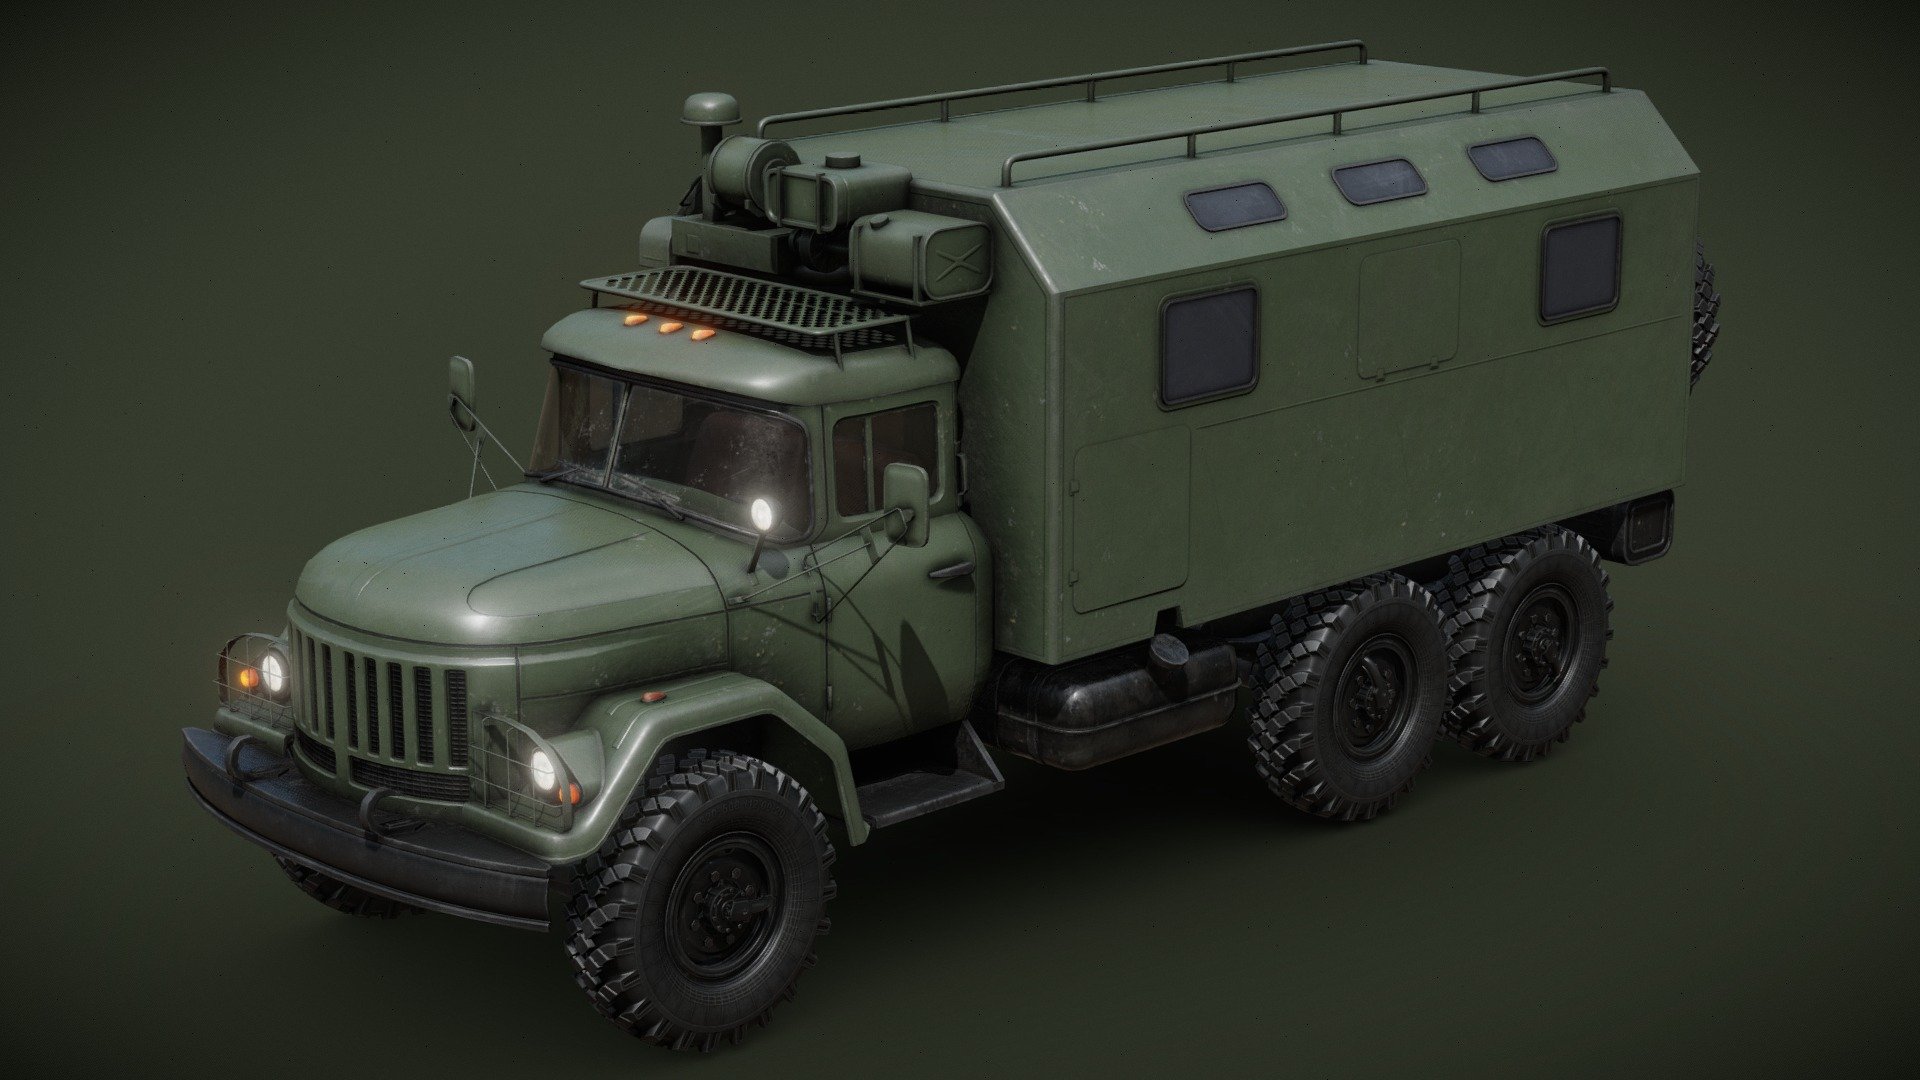 General purpose 3.5 tonne 6x6 army truck designed in the Soviet Union. Here, in mobile command post version.

Separate materials for: cabin, interior, glass, frame, wheel and command module.

Wheels are separate objects.

4k PBR textures for cabin, interior and command module. 2k for frame and wheel. 1k for the glass.

Textures for glass and command module with alpha transparency 3d model